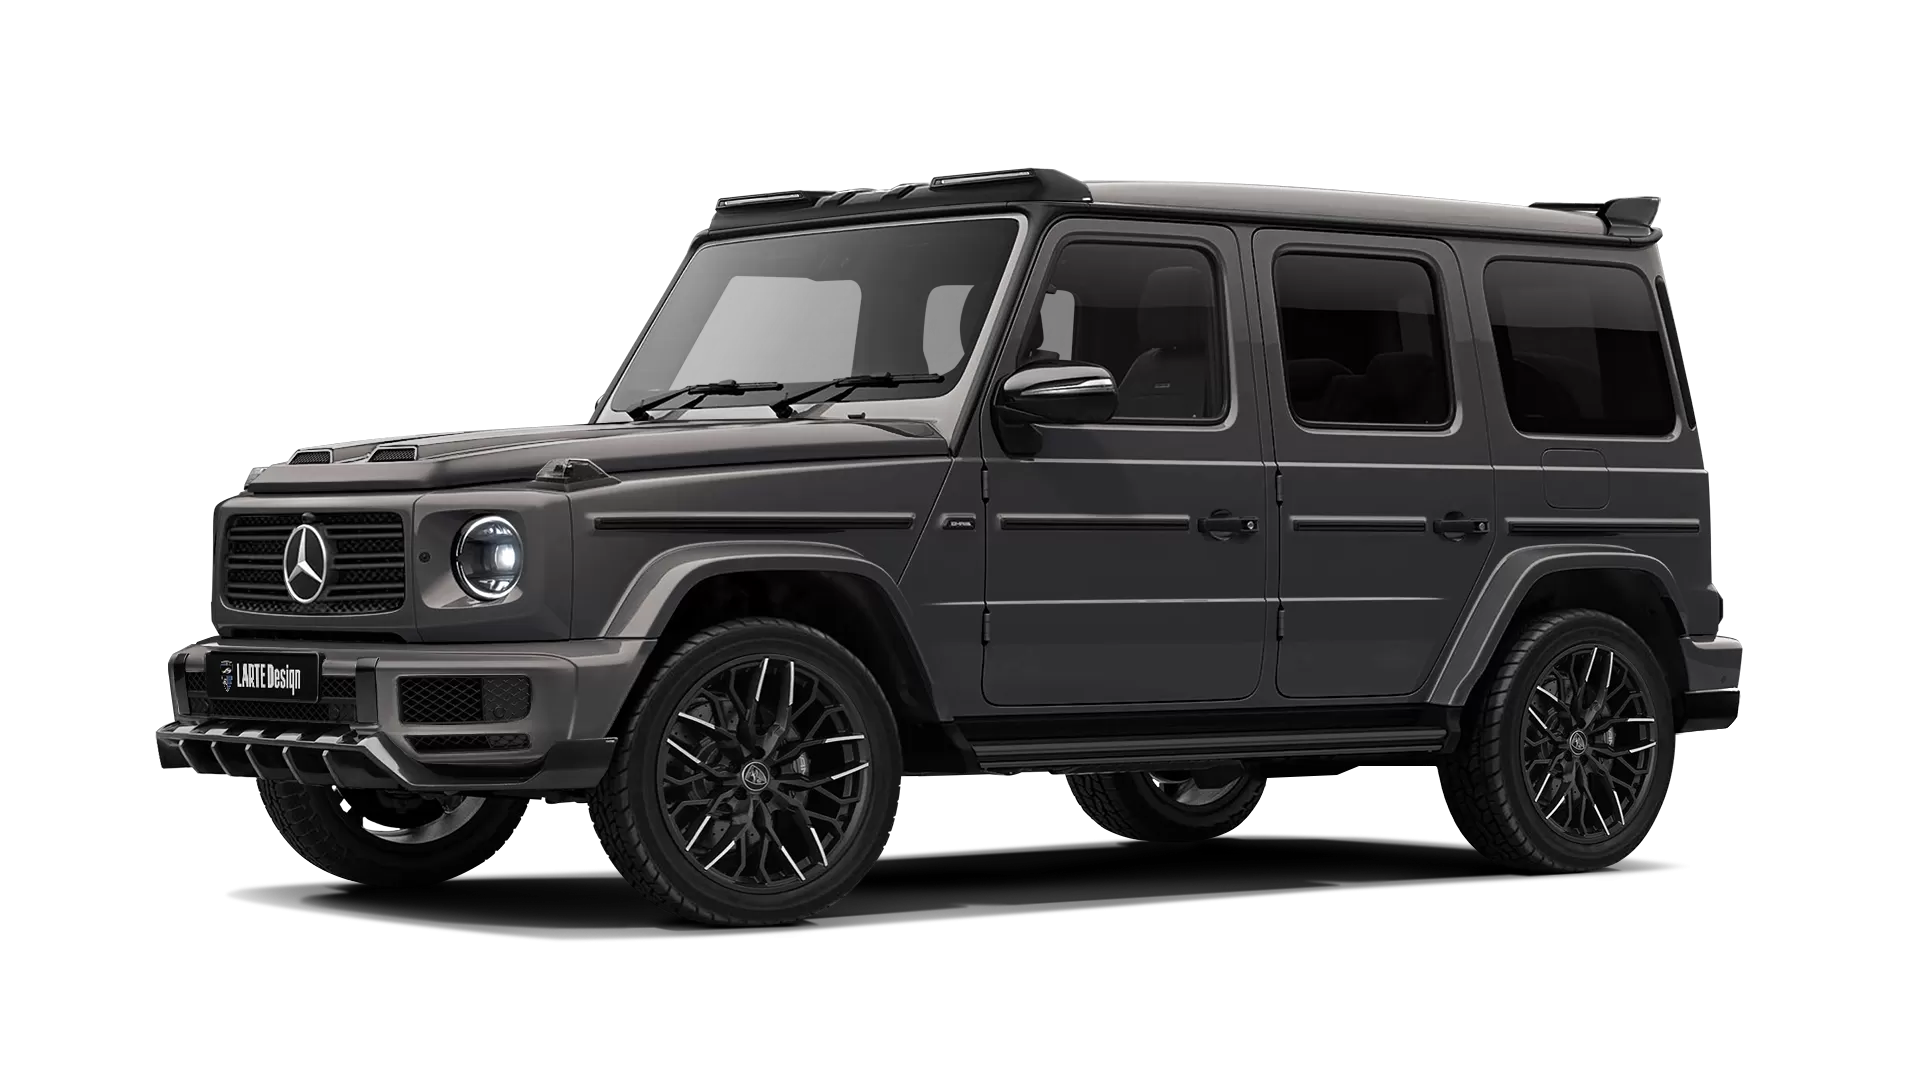 Mercedes G class W463 with painted body kit: front view shown in Indium Grey